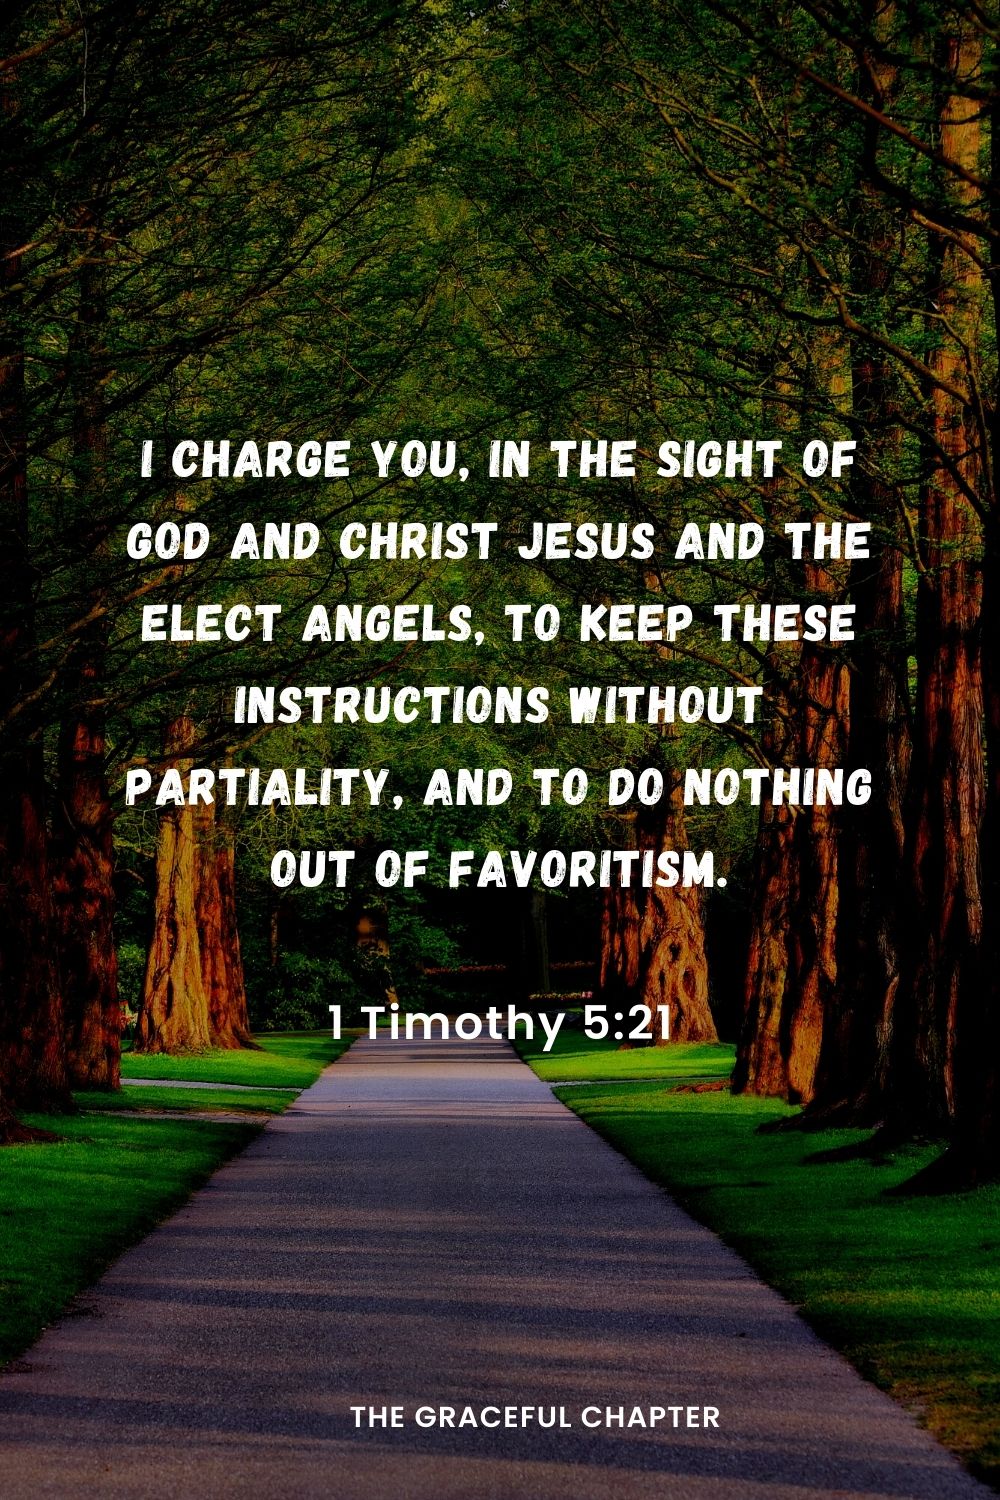 I charge you, in the sight of God and Christ Jesus and the elect angels, to keep these instructions without partiality, and to do nothing out of favoritism.